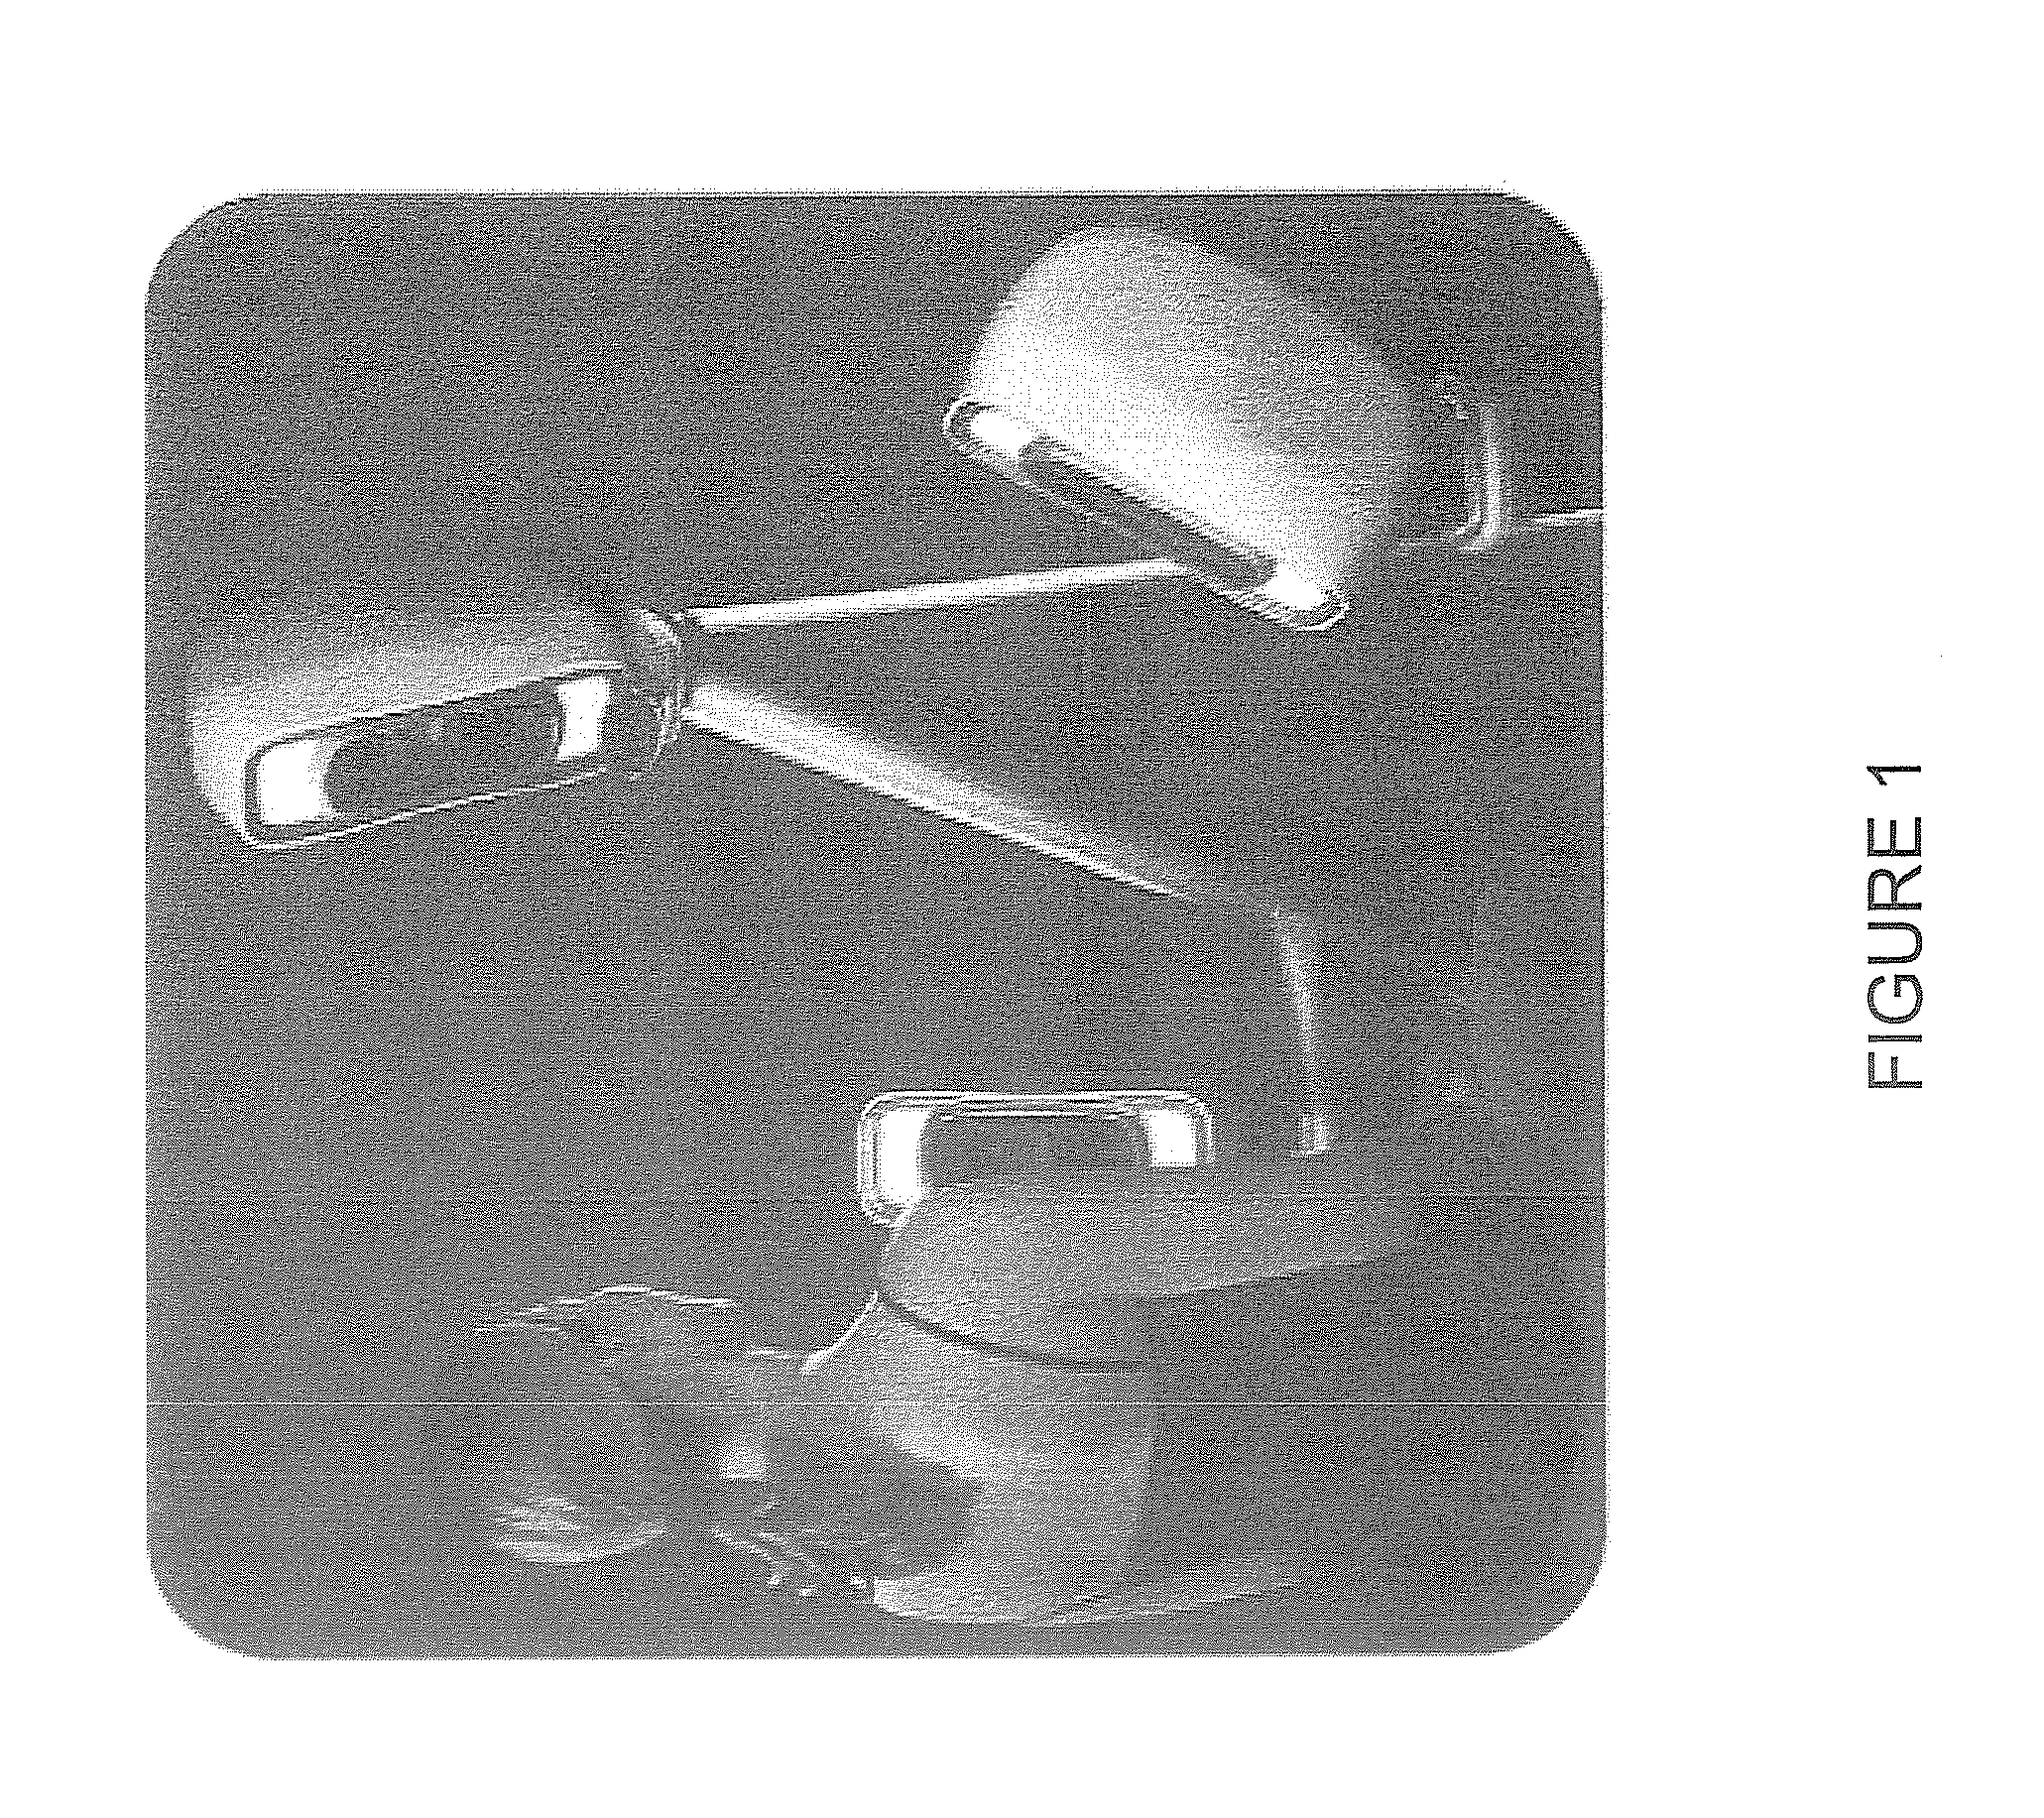 3D design and fabrication system for implants